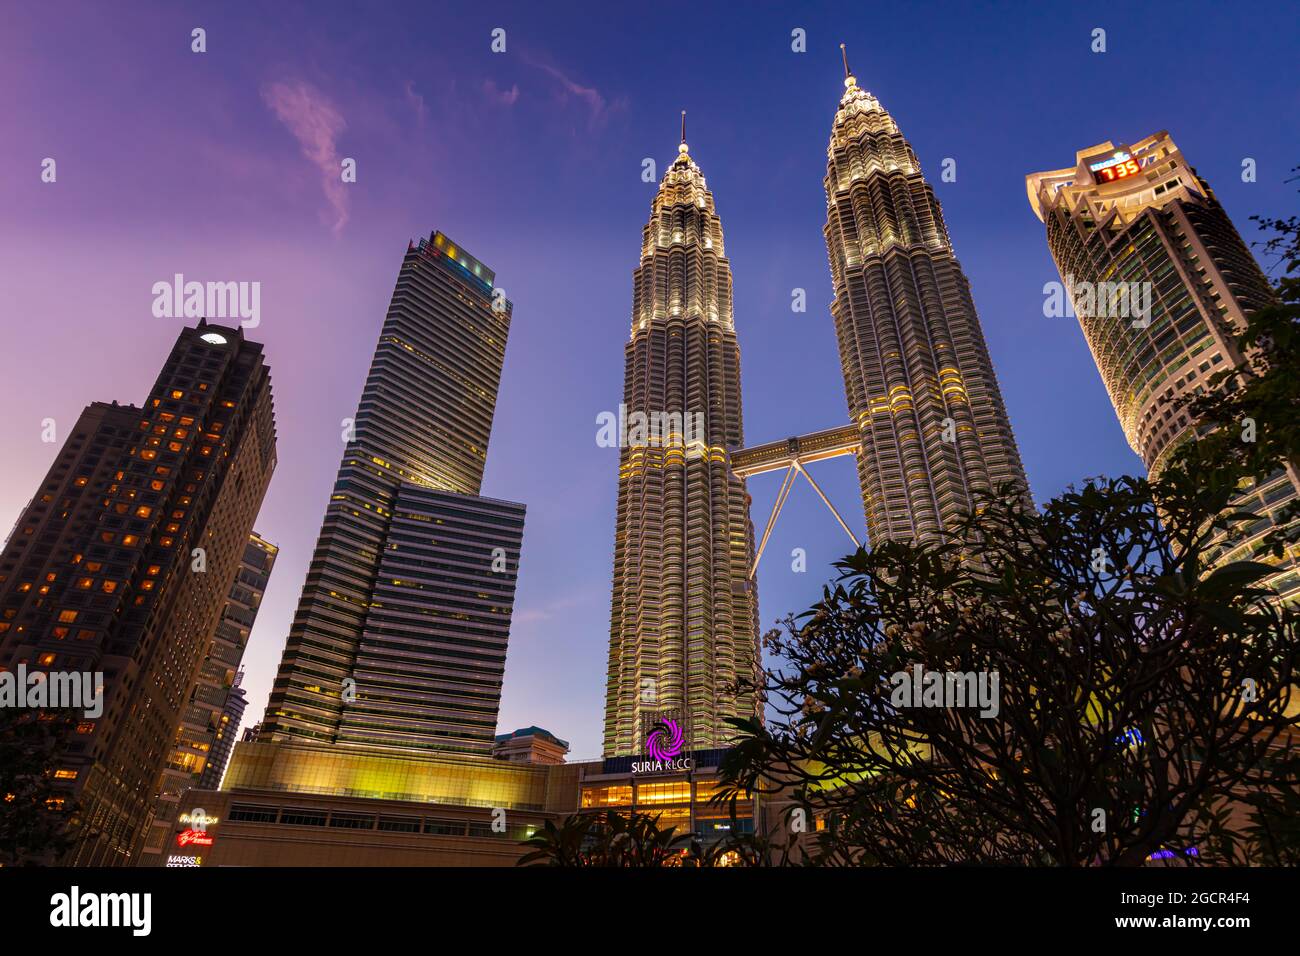 Kuala Lumpur, Malaysia - November 28, 2020: At night at the Petronas tower or twin towers in the heart of the South East Asia metropolis. Suria KL tow Stock Photo